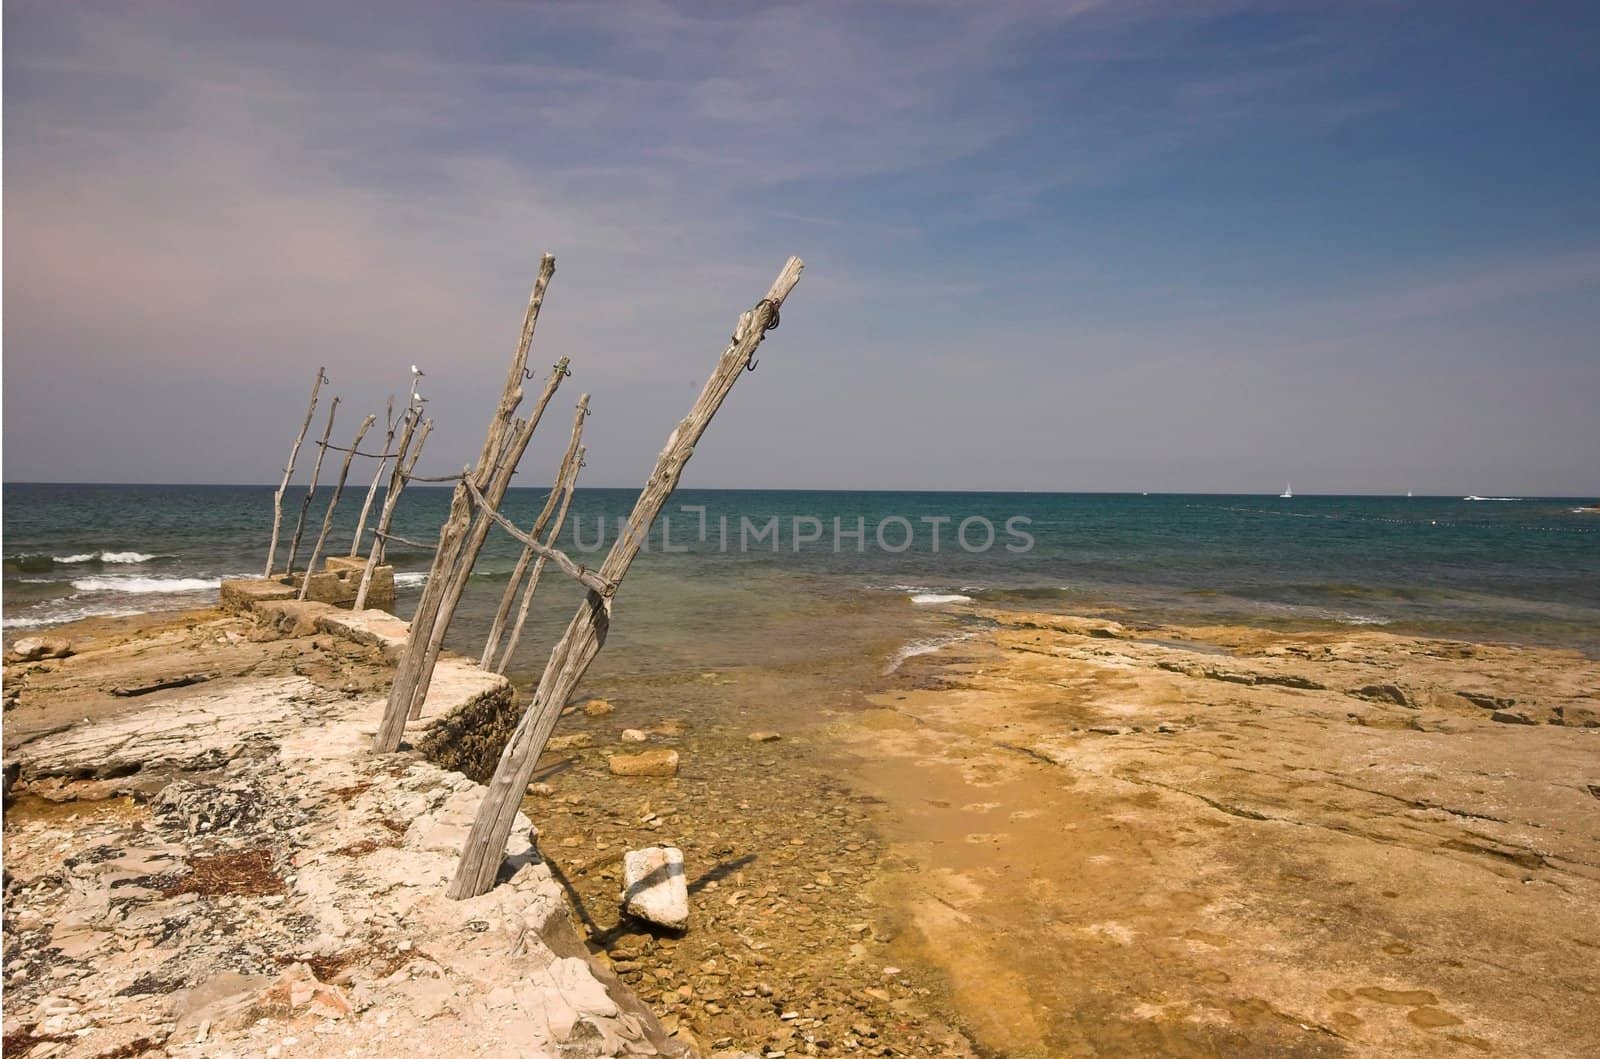 Croatian shore, wooden holders used for lifting boats